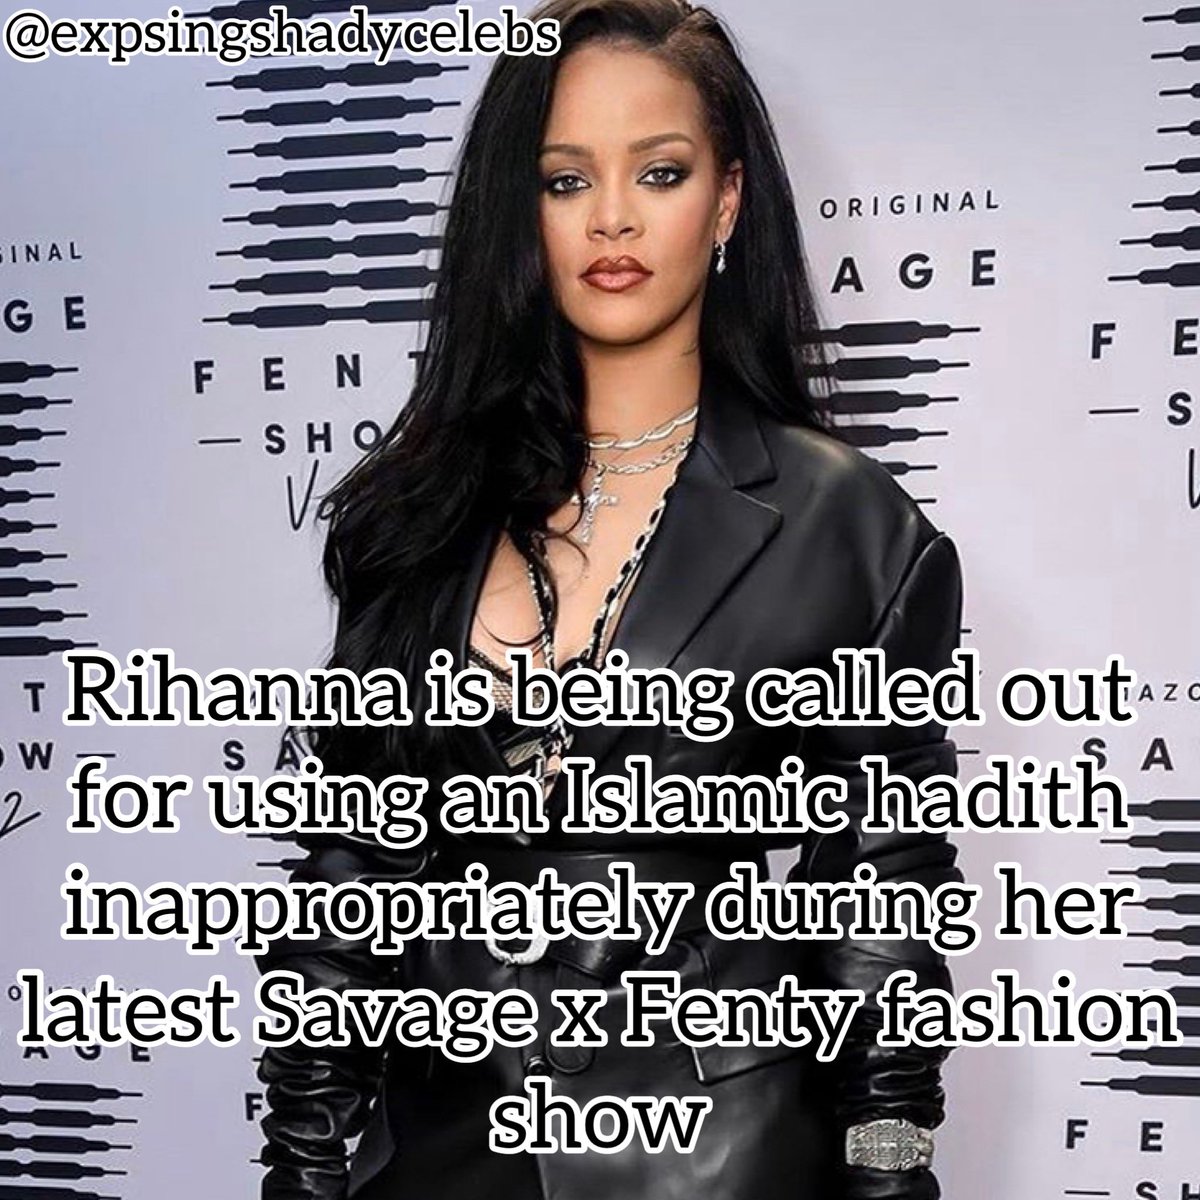 Rihanna is being called out for using an Islamic hadith inappropriately during her latest Savage x Fenty fashion show Creds to @/muslim on Instagram Pt1